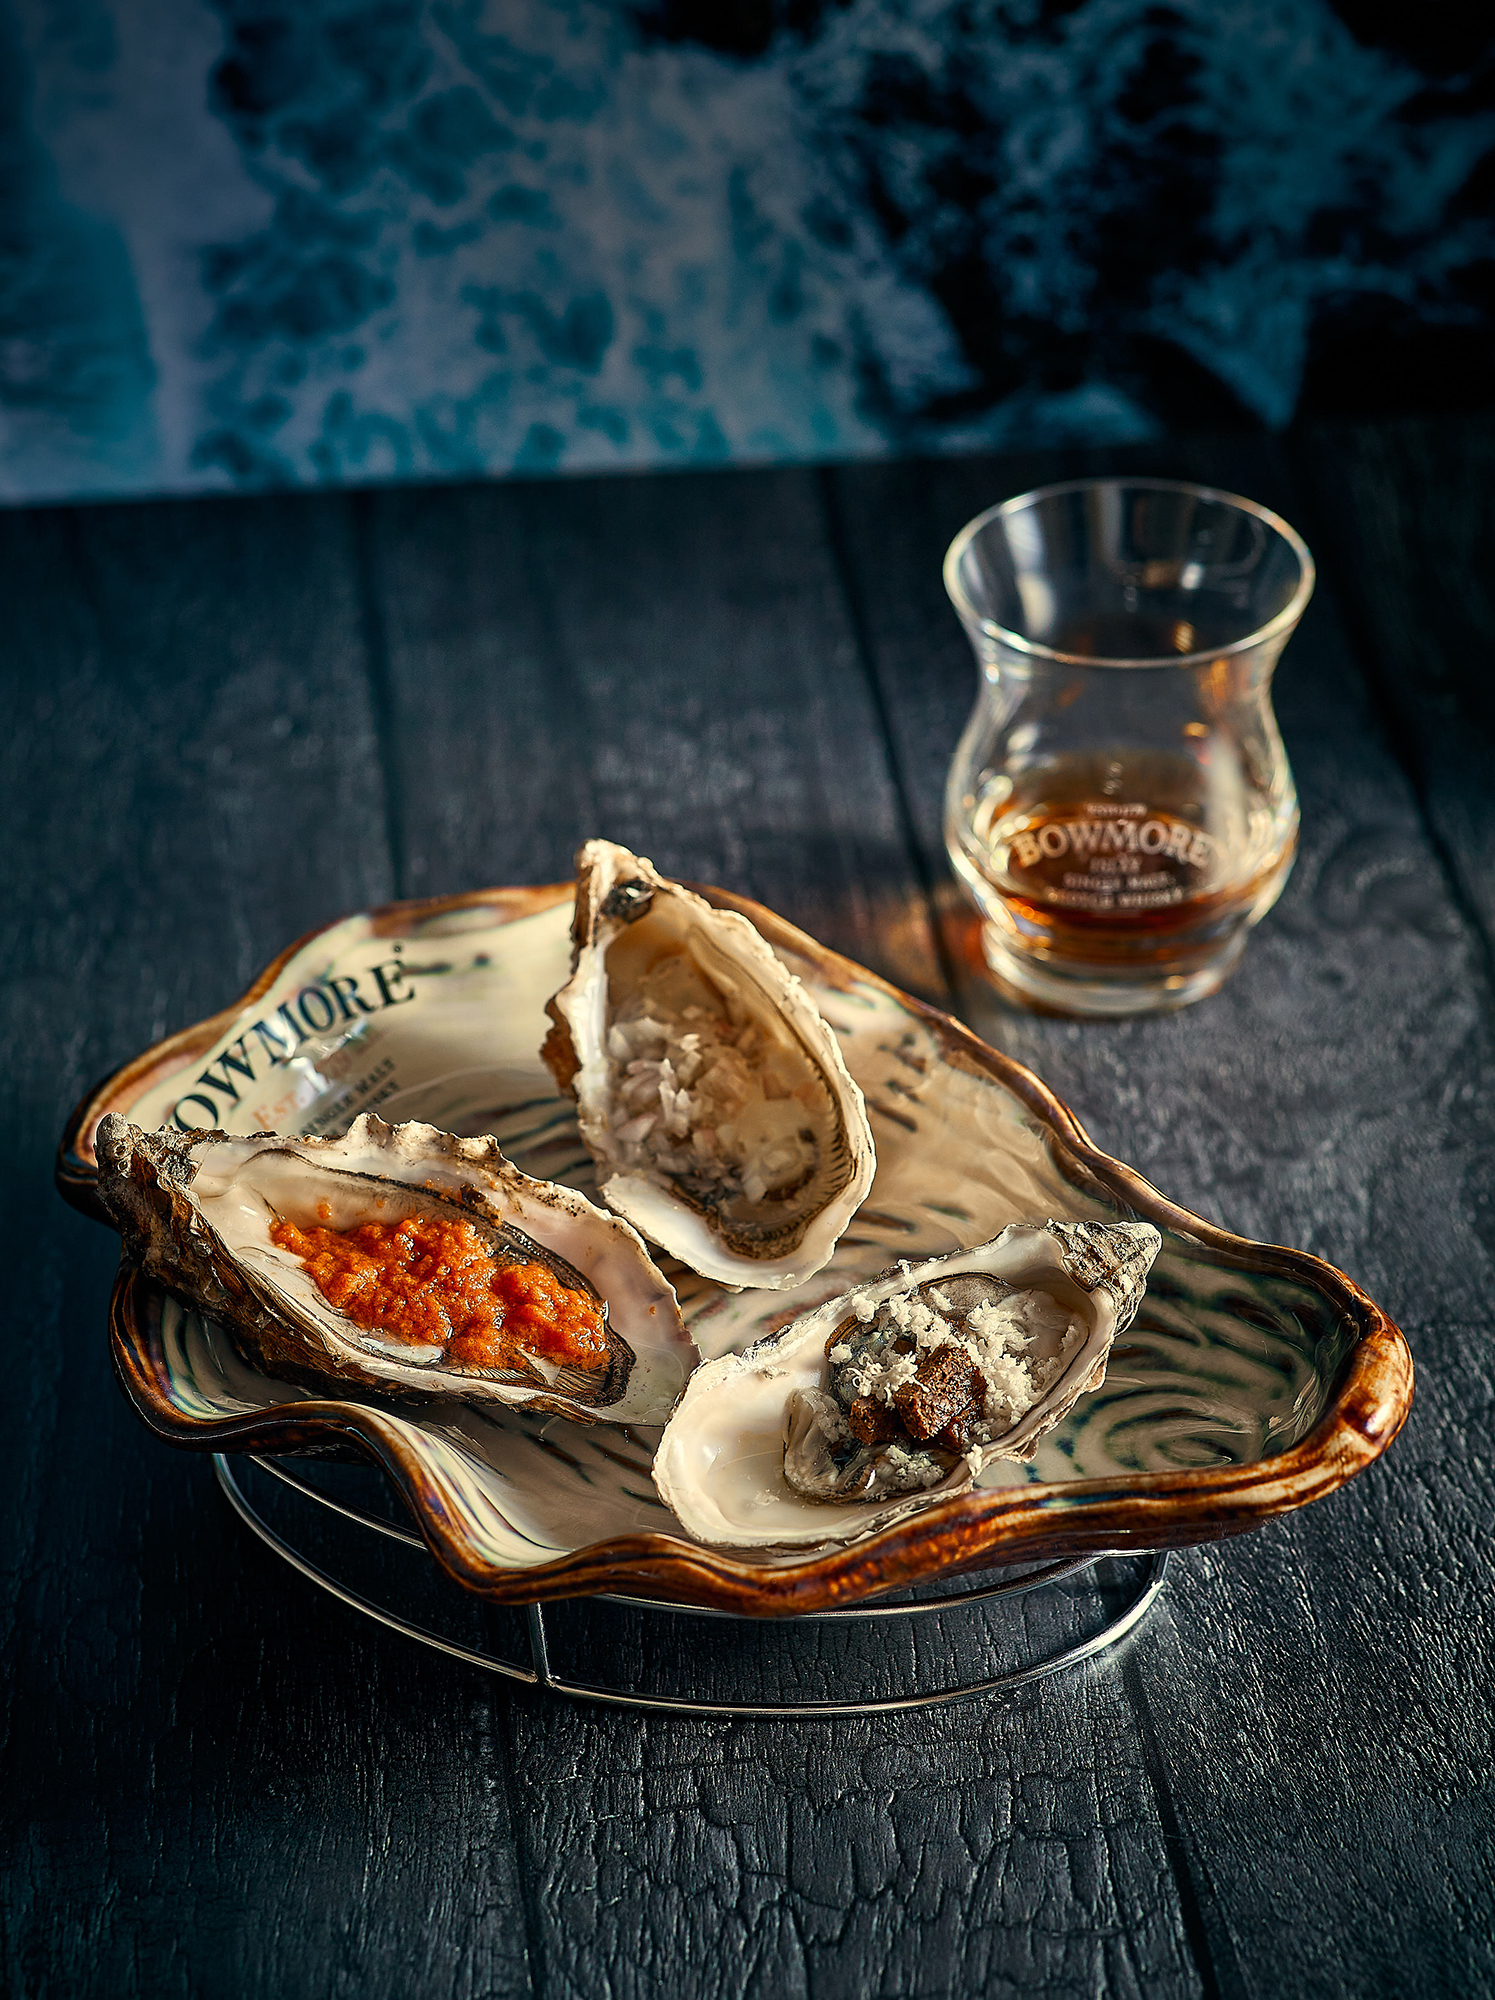 Oyster luge with Bowmore whisky